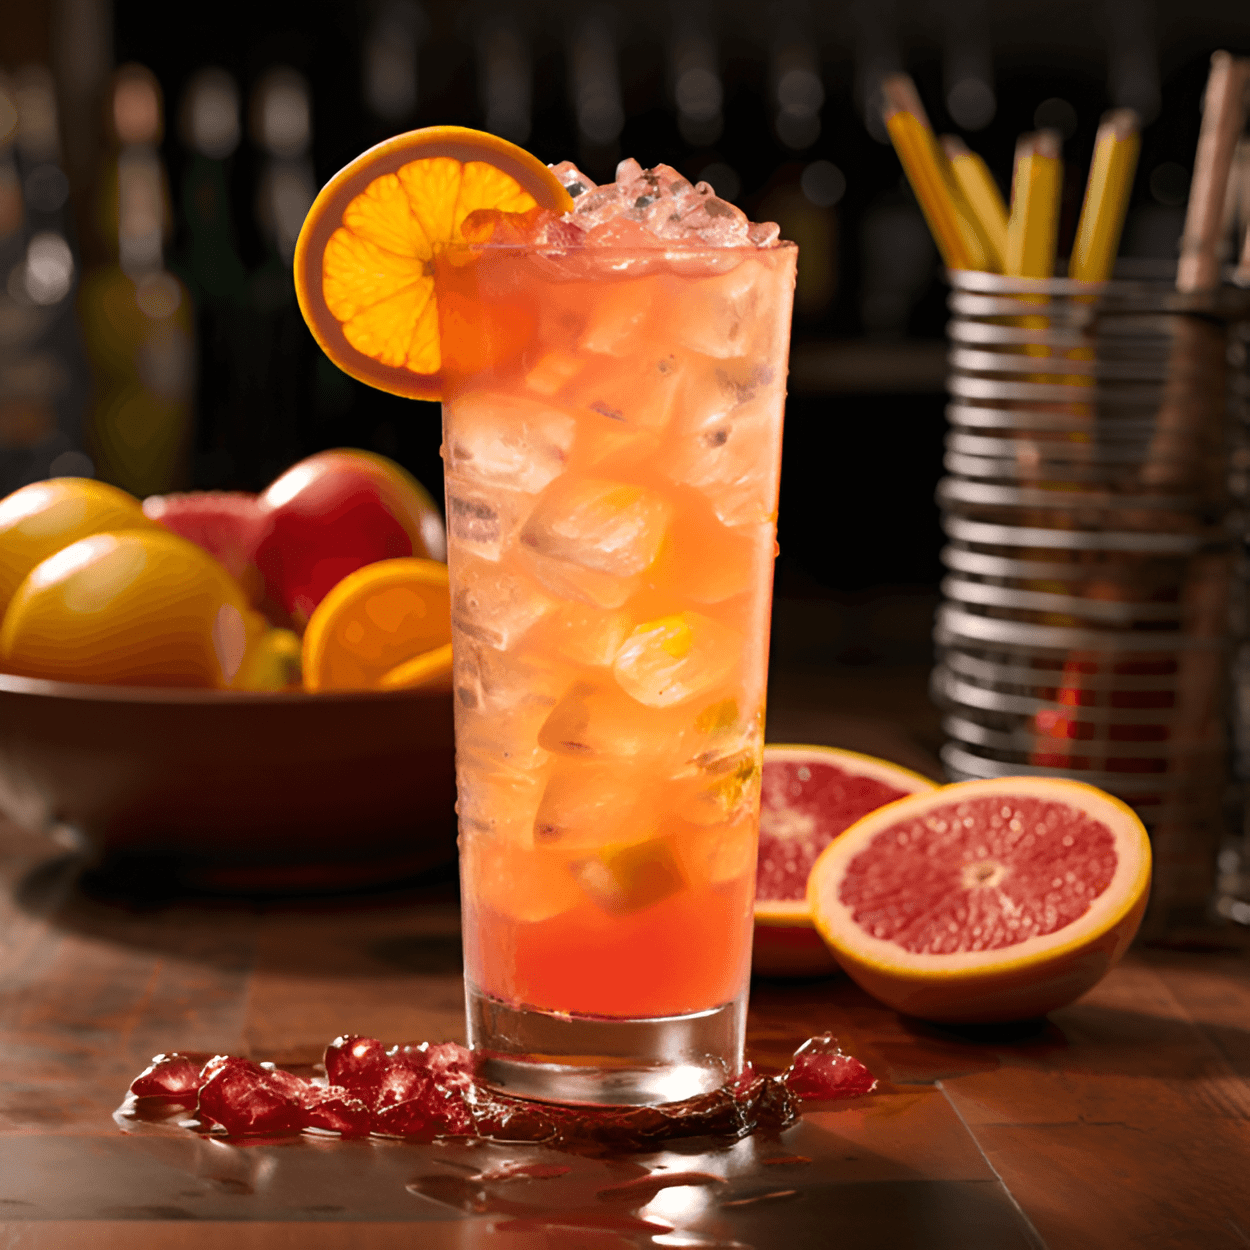 The Texas Twister is a sweet, fruity cocktail with a refreshing tang. The blend of orange, pineapple, and grapefruit juices gives it a tropical, citrusy flavor, while the vodka and rum add a subtle, warming kick. The cocktail is balanced, not too sweet nor too tart, making it a delightful sipper on a hot summer day.